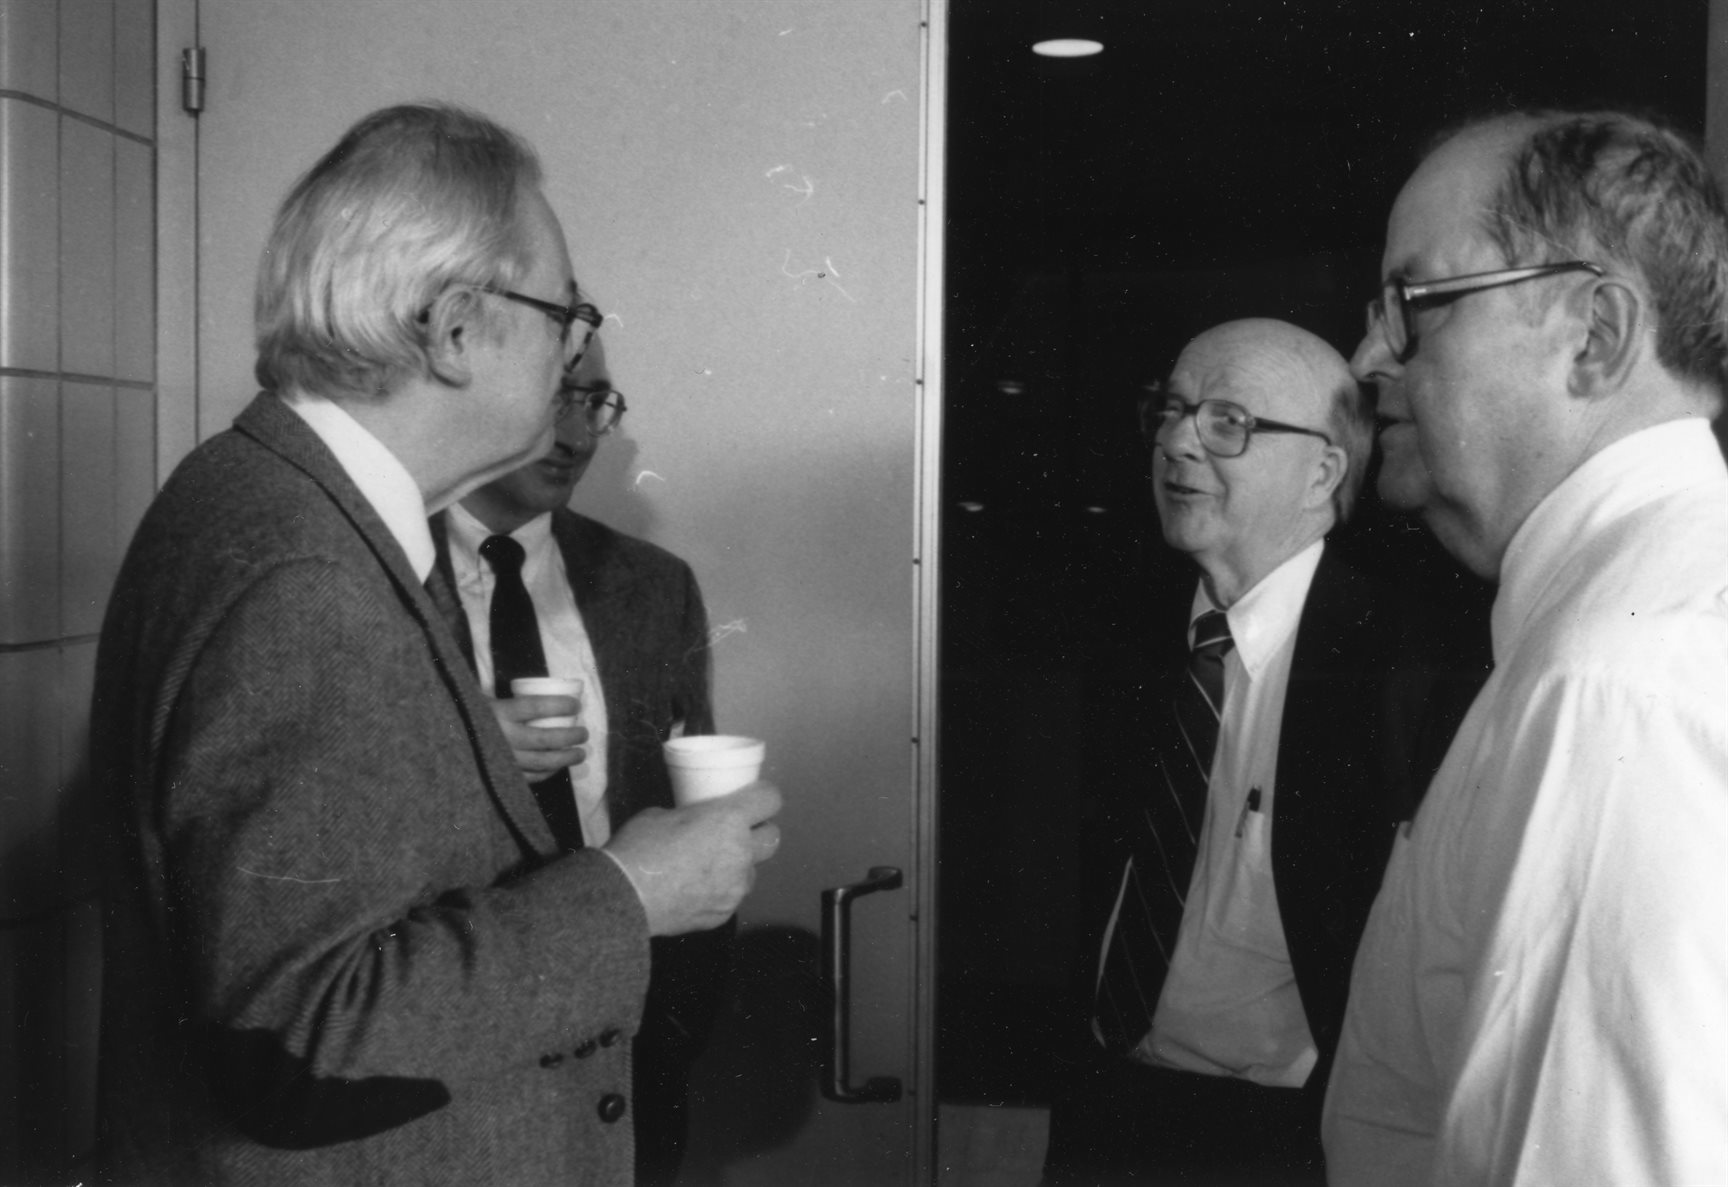 Charles Slichter, David McCall, and William Slichter (Charles&rsquo; brother) converse at a meeting, undated. Department of Physics, University of Illinois at Urbana-Champaign, courtesy of Emilio Segr&egrave; Visual Archives of the American Institute of Physics